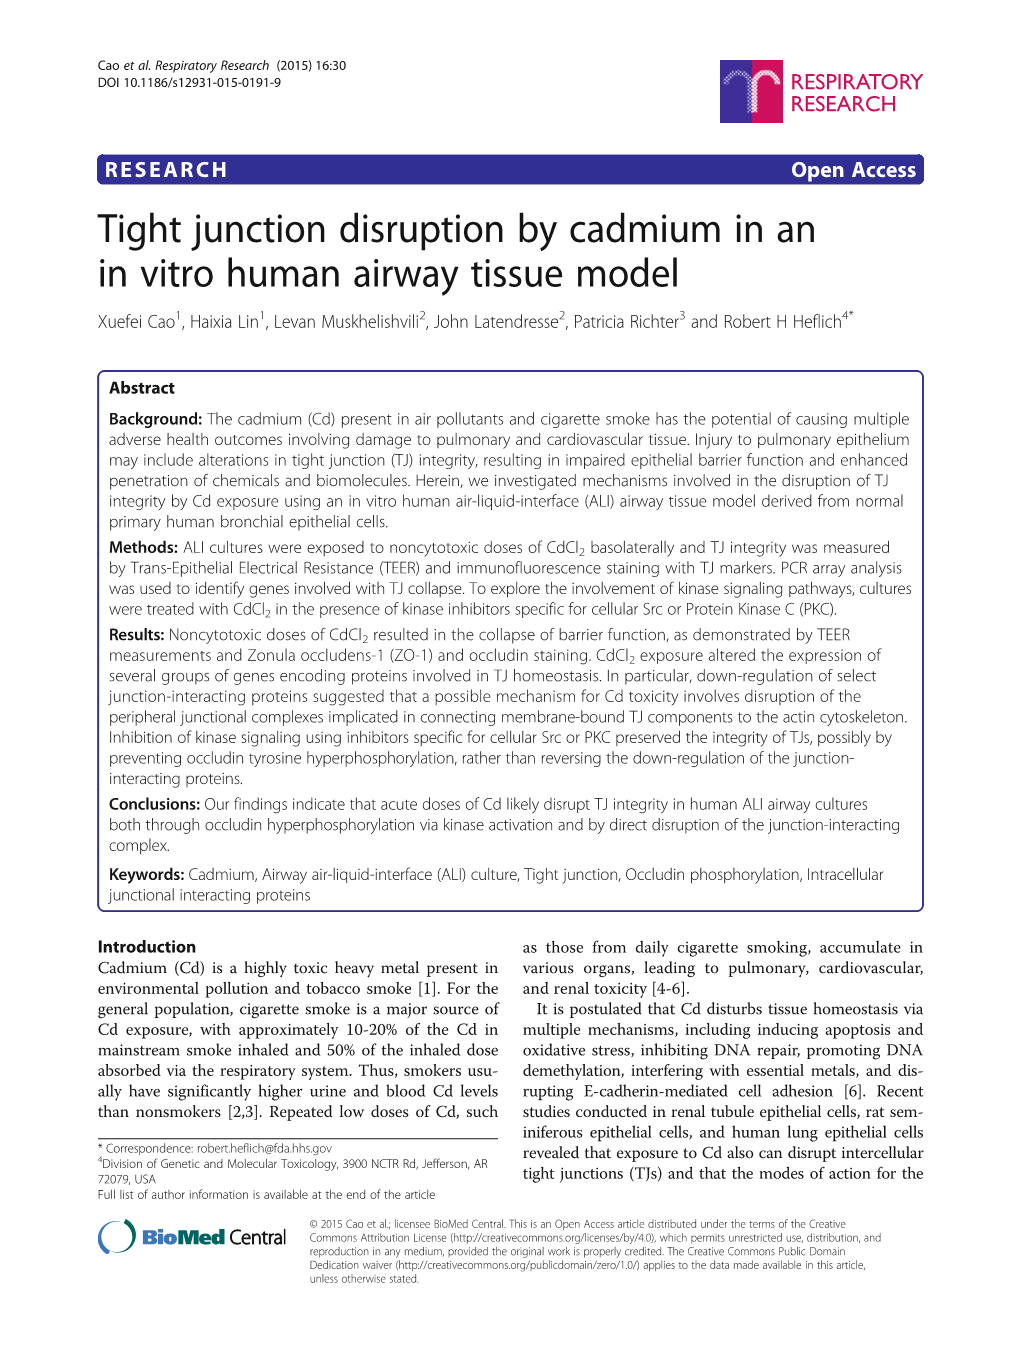 Tight Junction Disruption by Cadmium in an in Vitro Human Airway Tissue